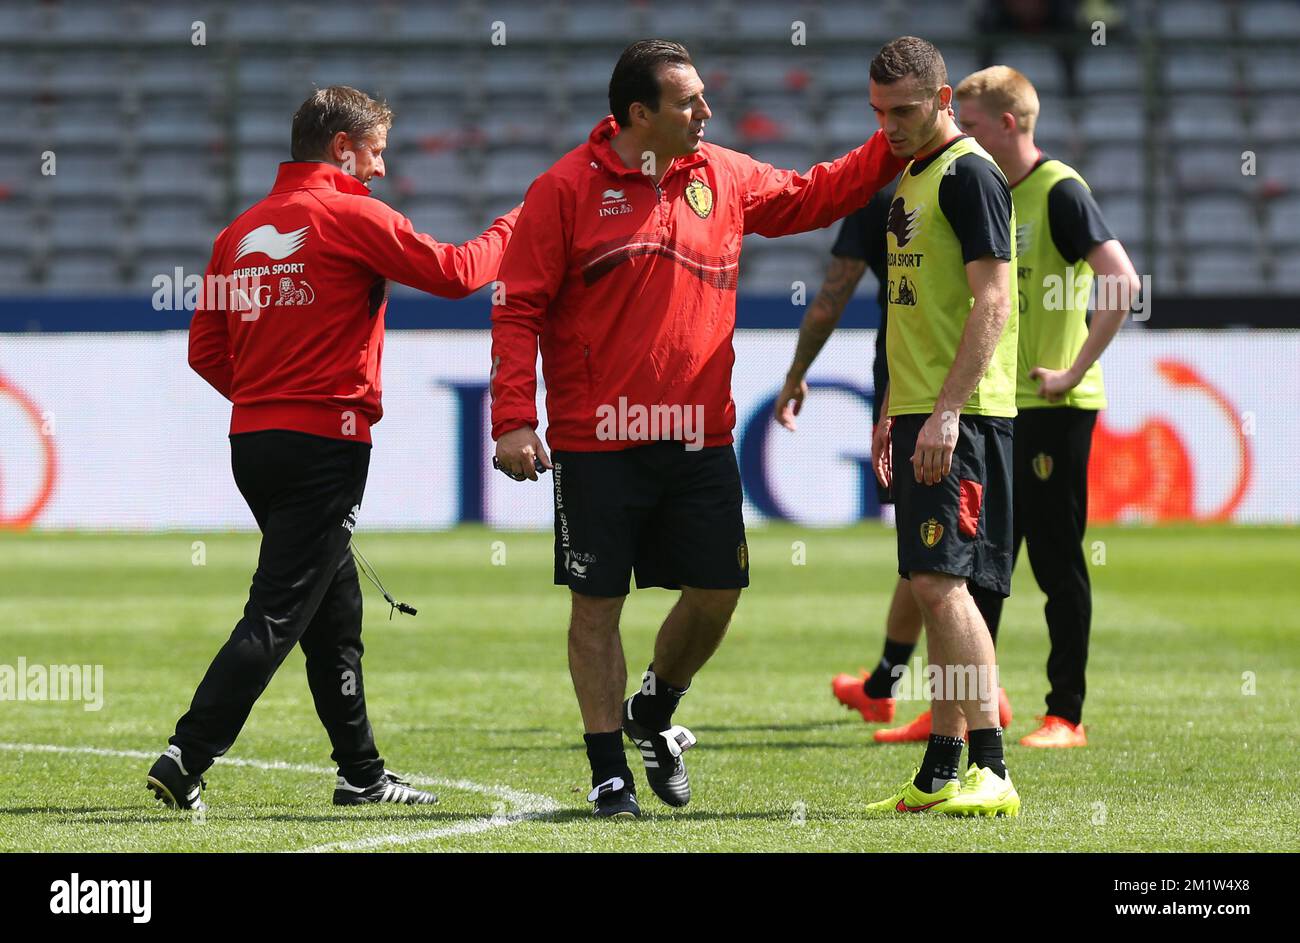 Belgium's head coach Marc Wilmots and Belgium's Thomas Vermaelen pictured during the last training session of the Belgian national soccer team Red Devils before their departure to the World Cup in Brazil, on Sunday 08 June 2014, in Brussels. The 2014 Fifa World Cup takes place from 12 June till 13 July in Brazil. BELGA PHOTO VIRGINIE LEFOUR Stock Photo